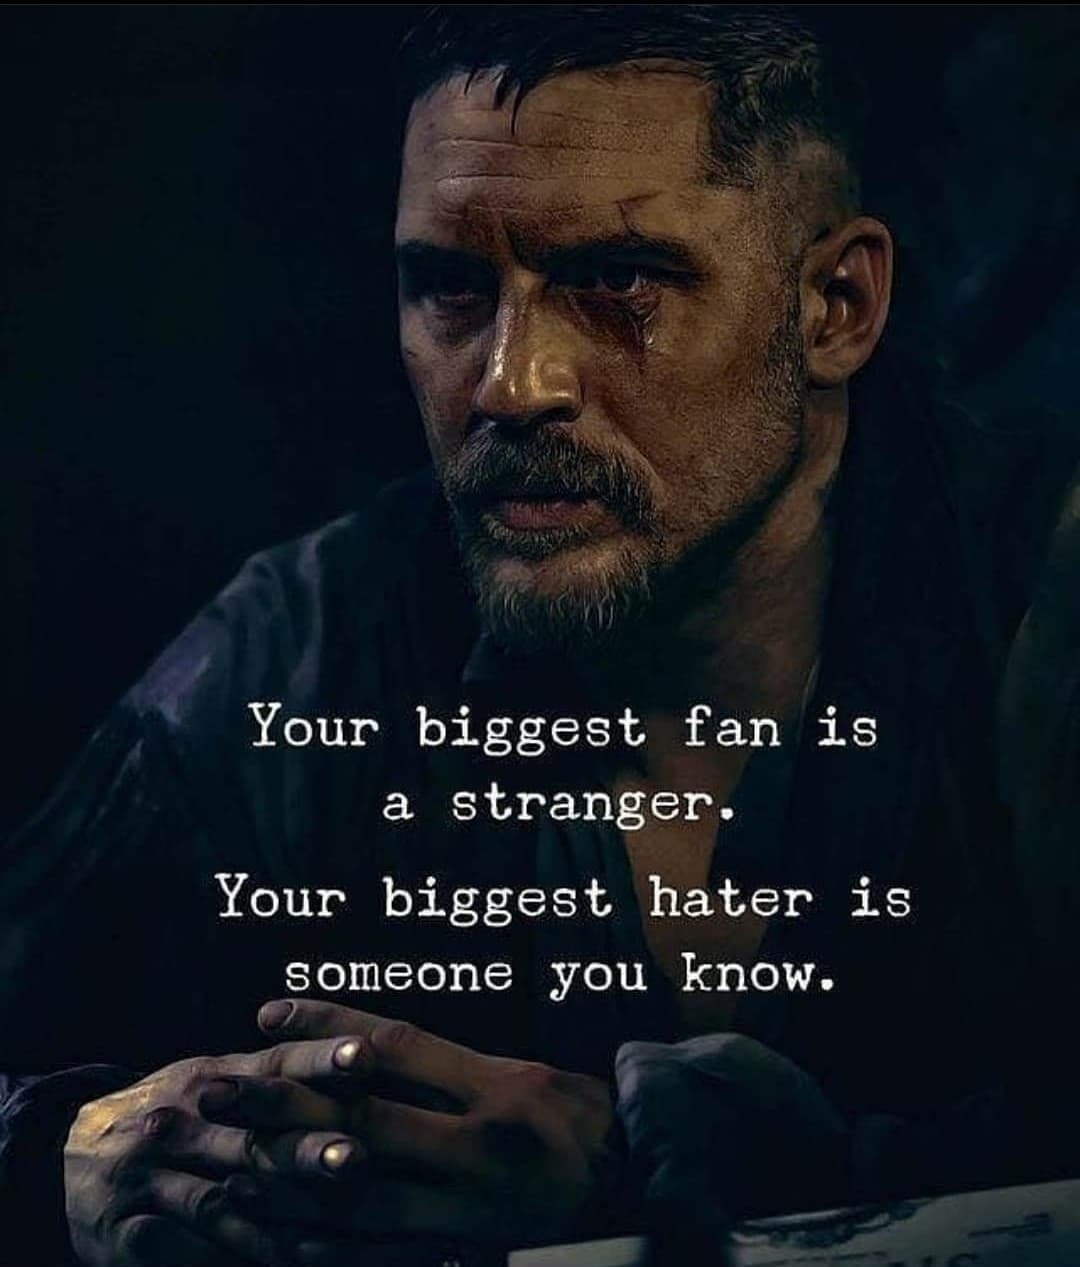 Your biggest fan is a stranger. Your biggest hater is someone you know